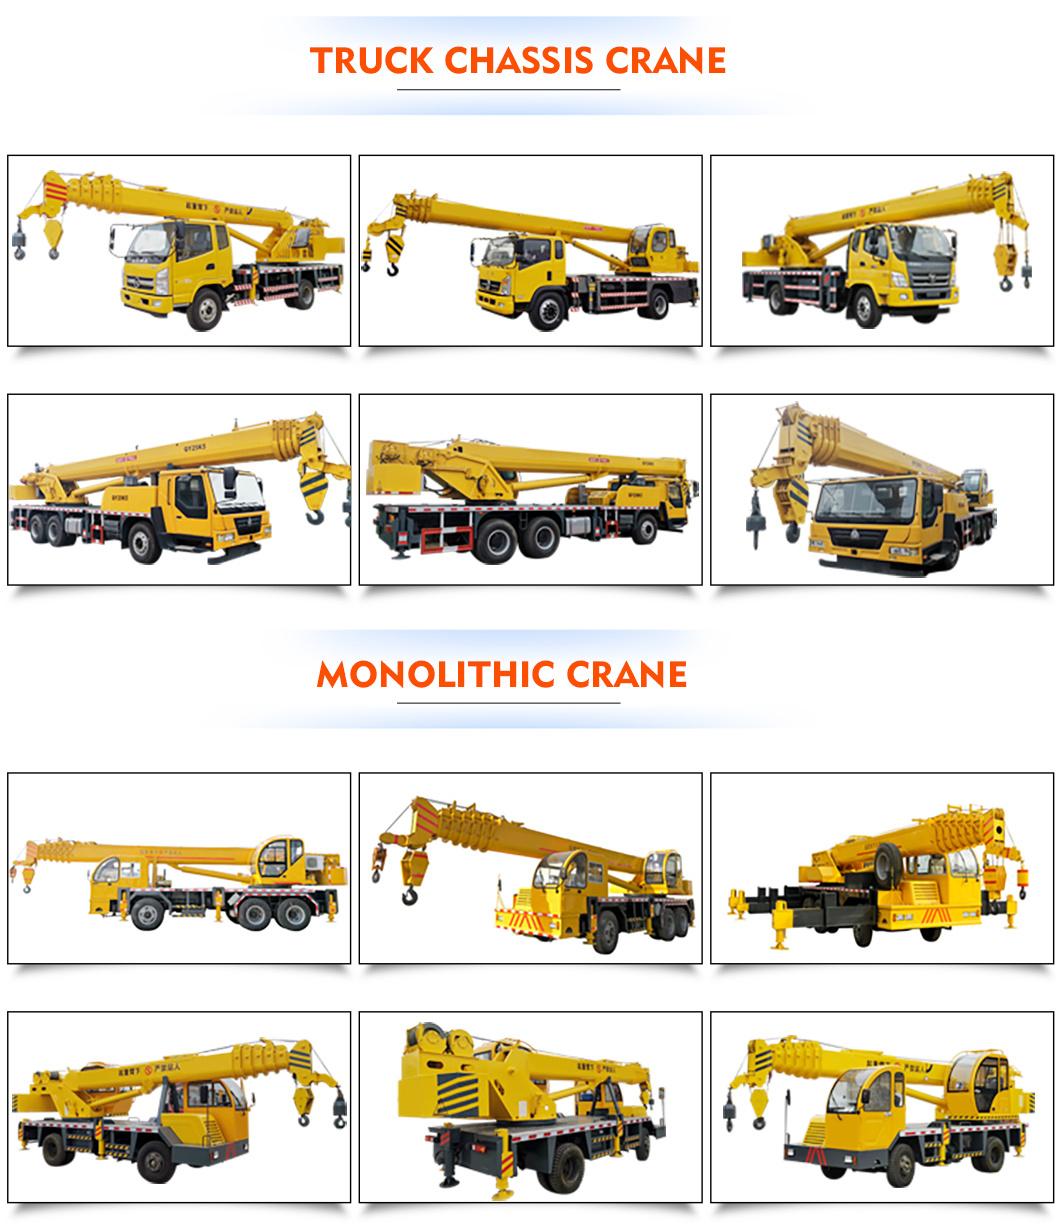 Best Types of Reliability Mature and Reliable Cranes Mine Crane 10 Tons Crane for Pickup